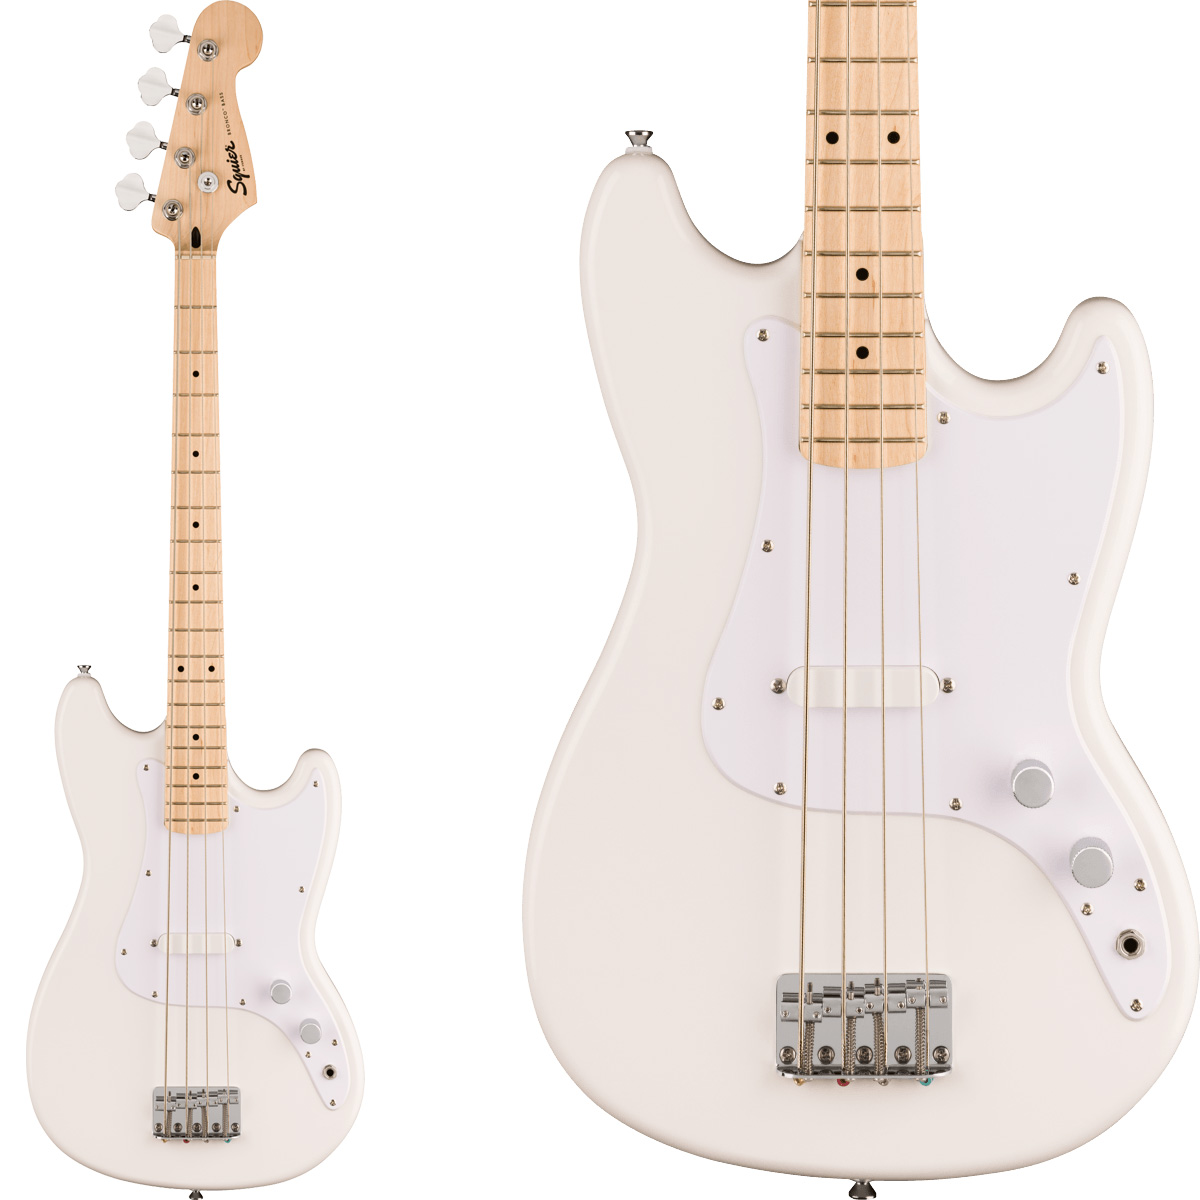 Squier by Fender SONIC BRONCO BASS Maple Fingerboard White ...